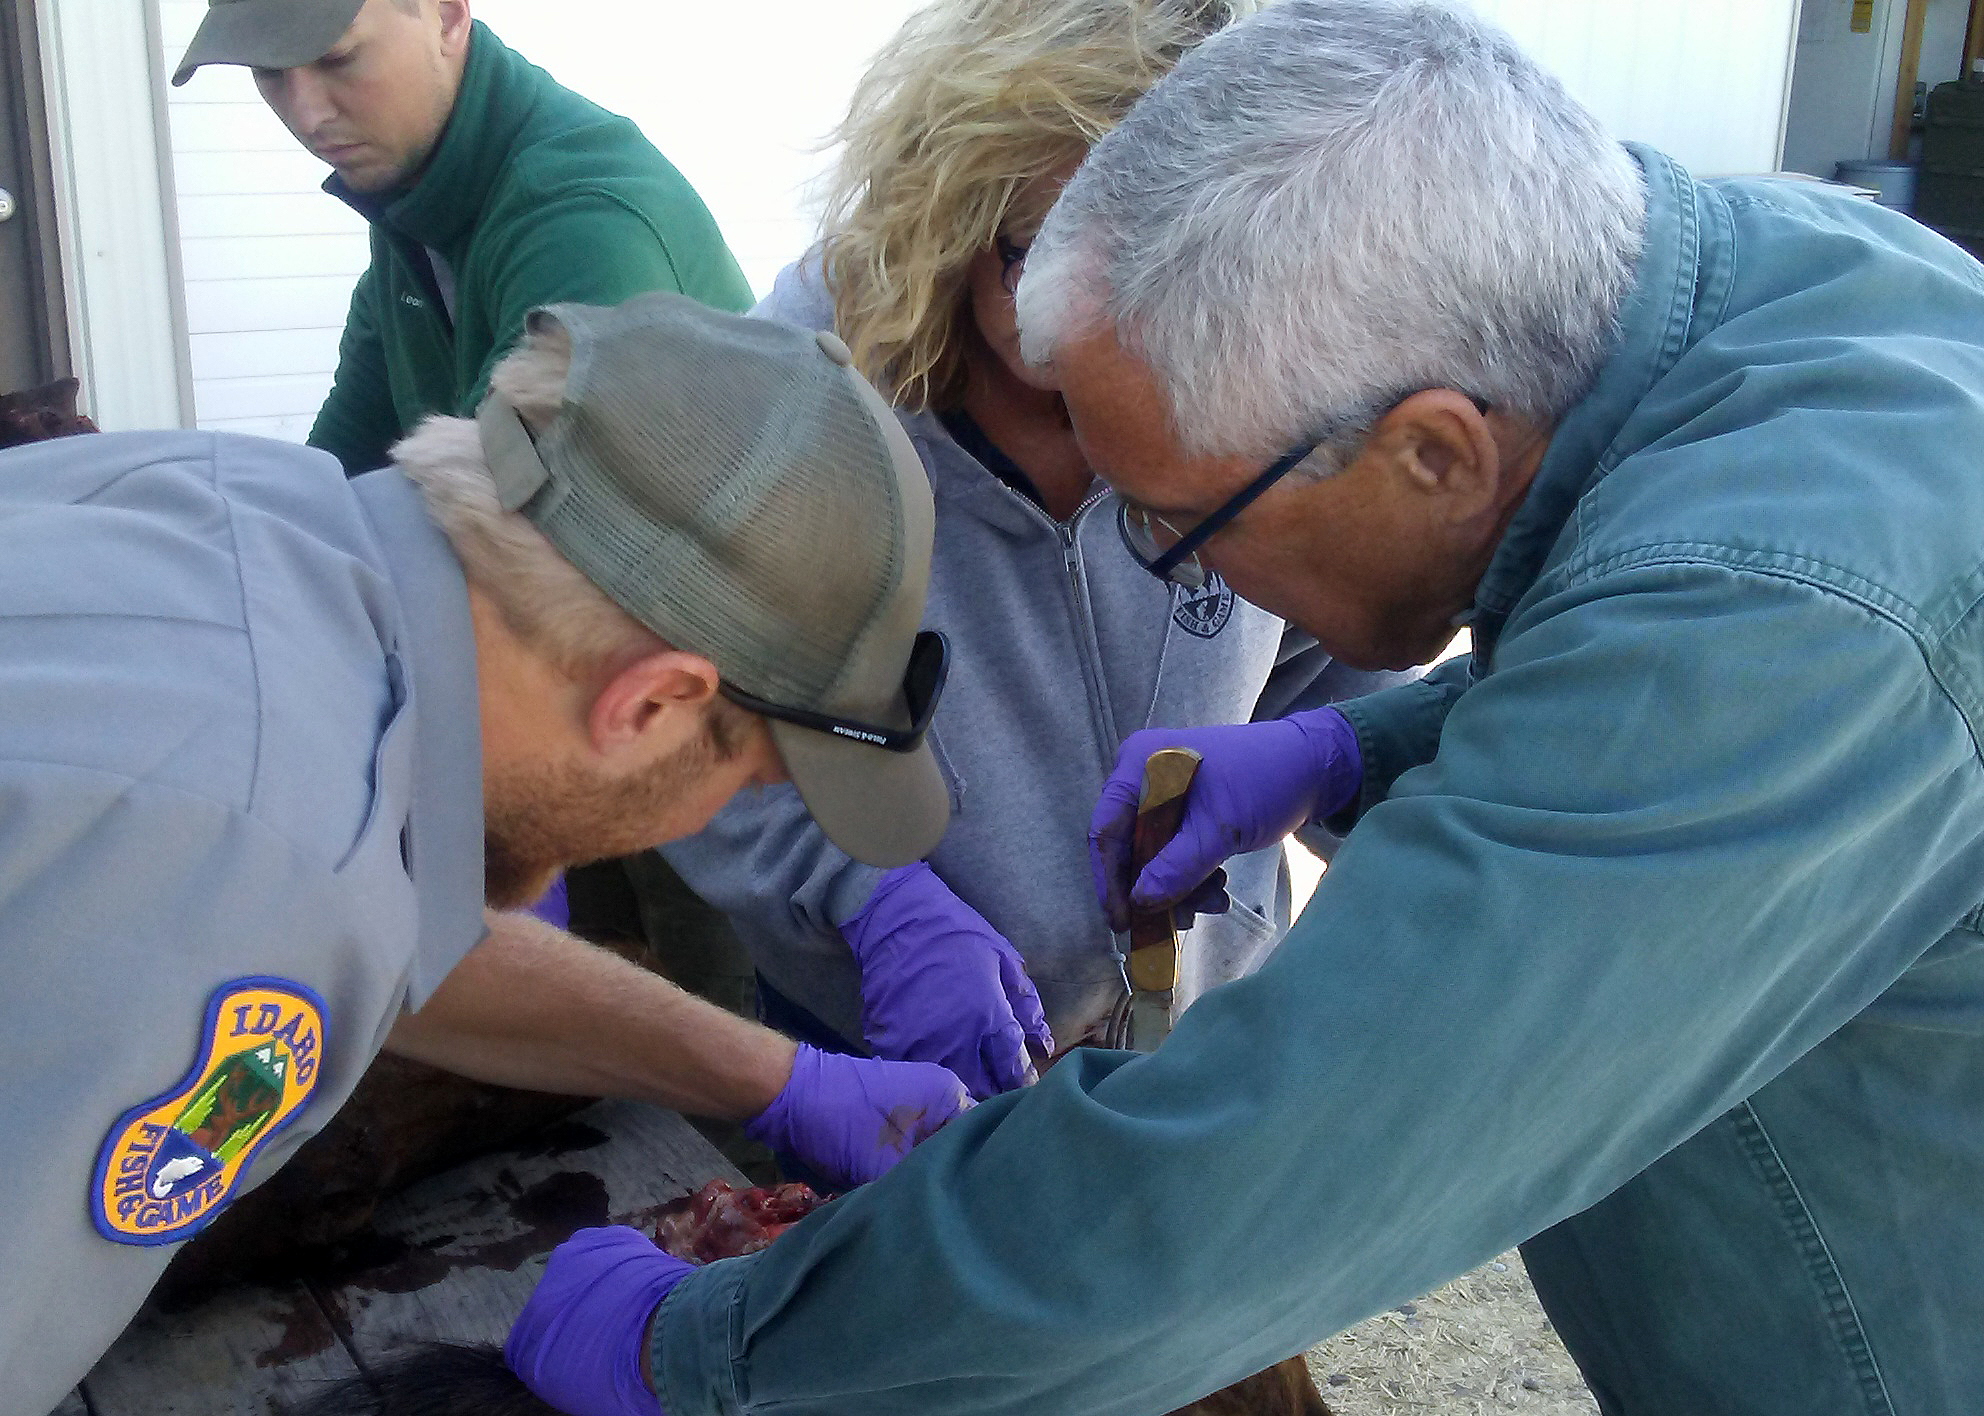 A group of people removing a lymph node from a harvested deer.